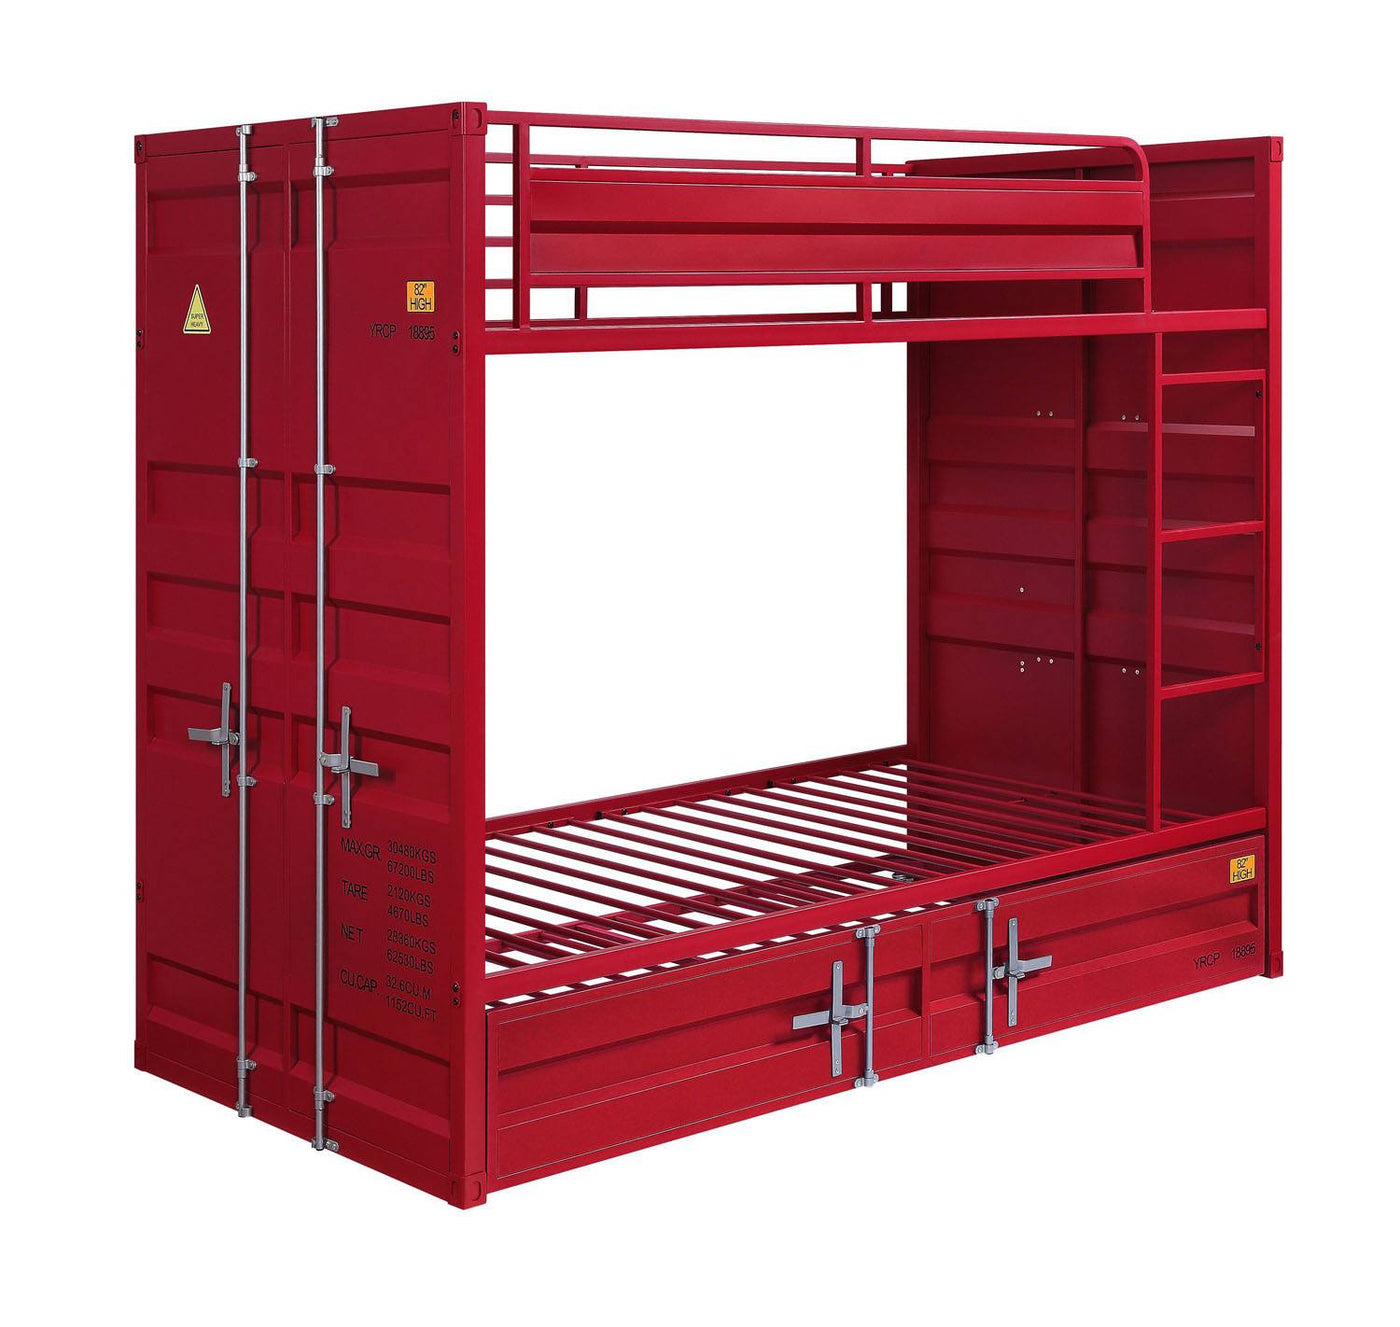 Konto Industrial Twin Bunk Bed with Trundle - Red